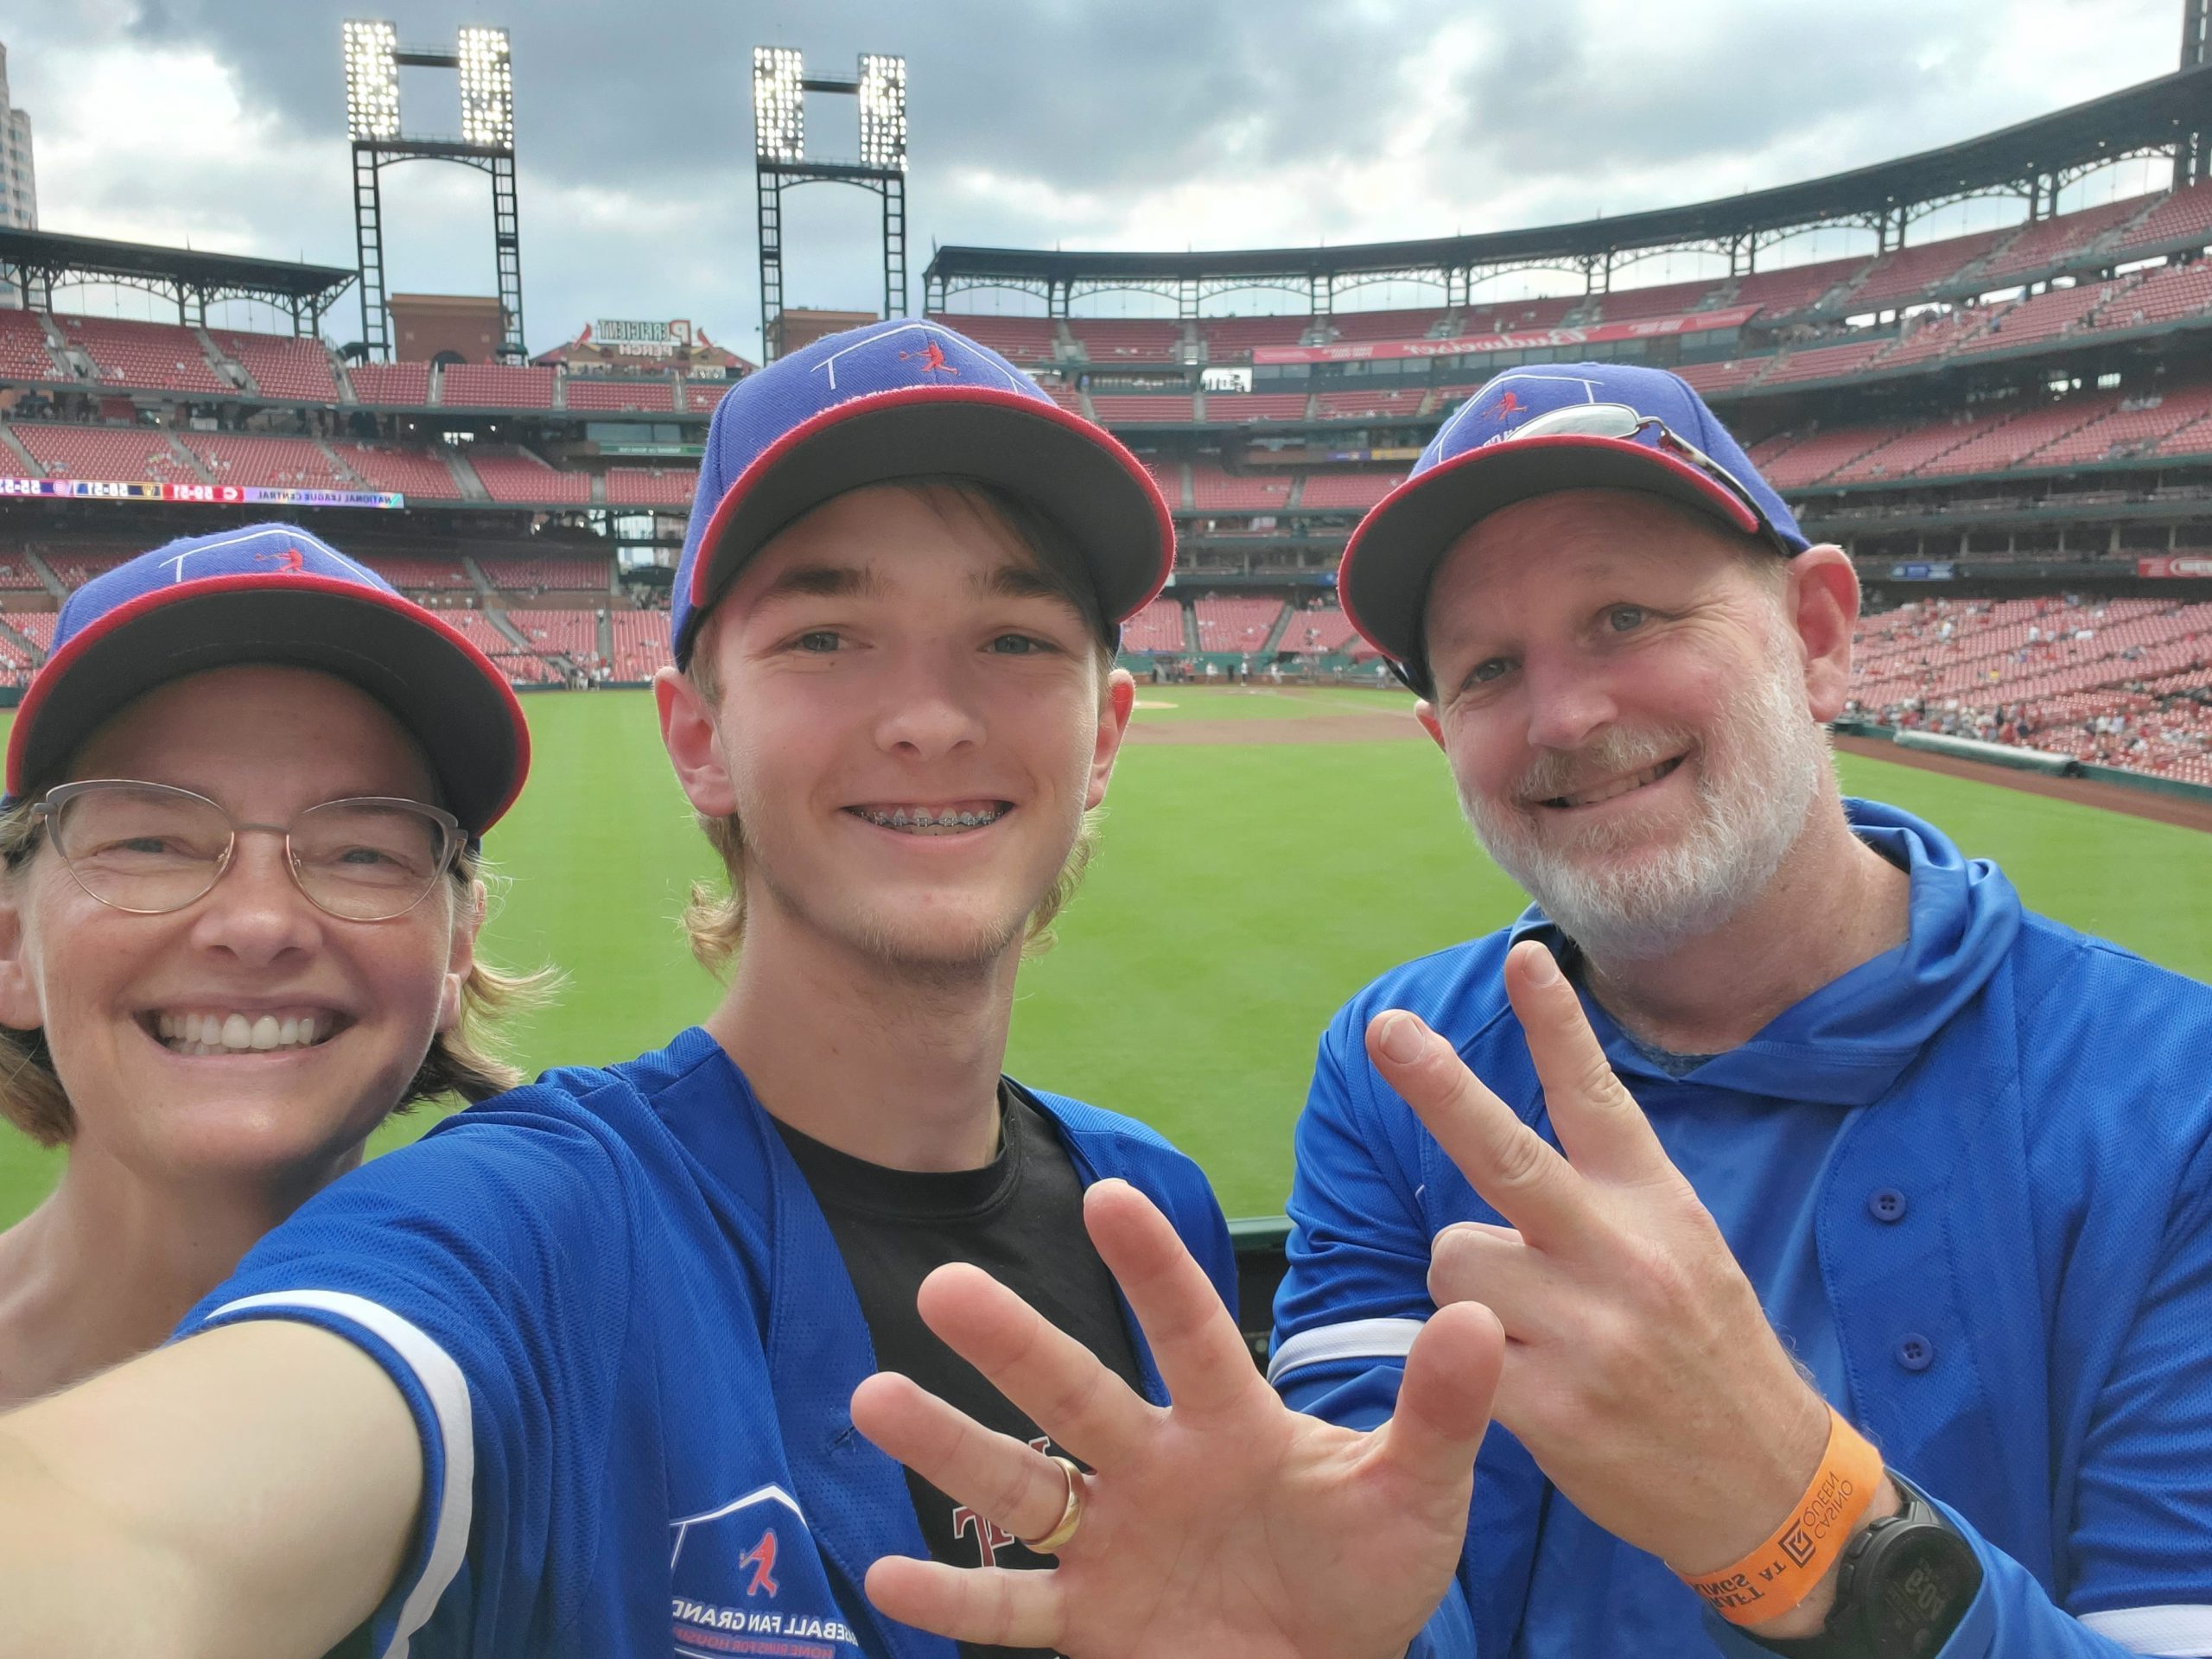 Heather, Ryan and Brad holding up 7 fingers to indicate the seventh stadium on their trip, in front of the diamond at Busch Stadium.